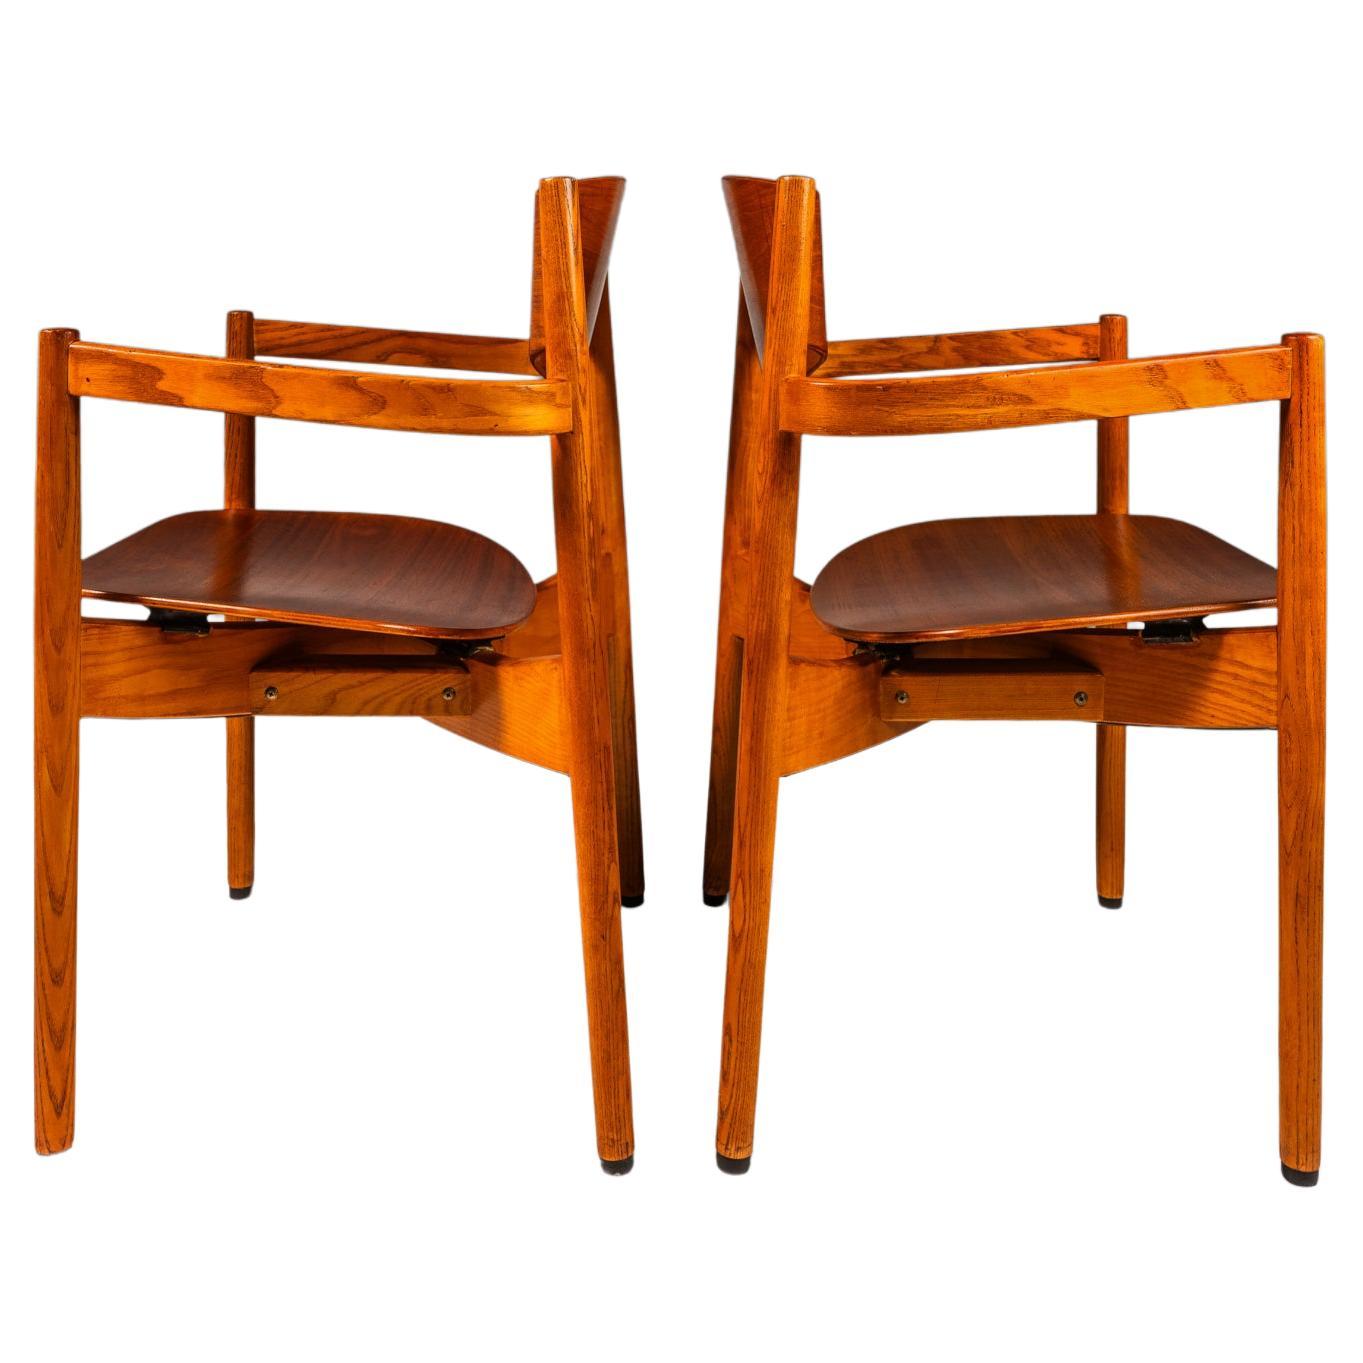 Set of 2 Stacking in Oak & Walnut Chairs by Jens Risom, USA, c. 1960s